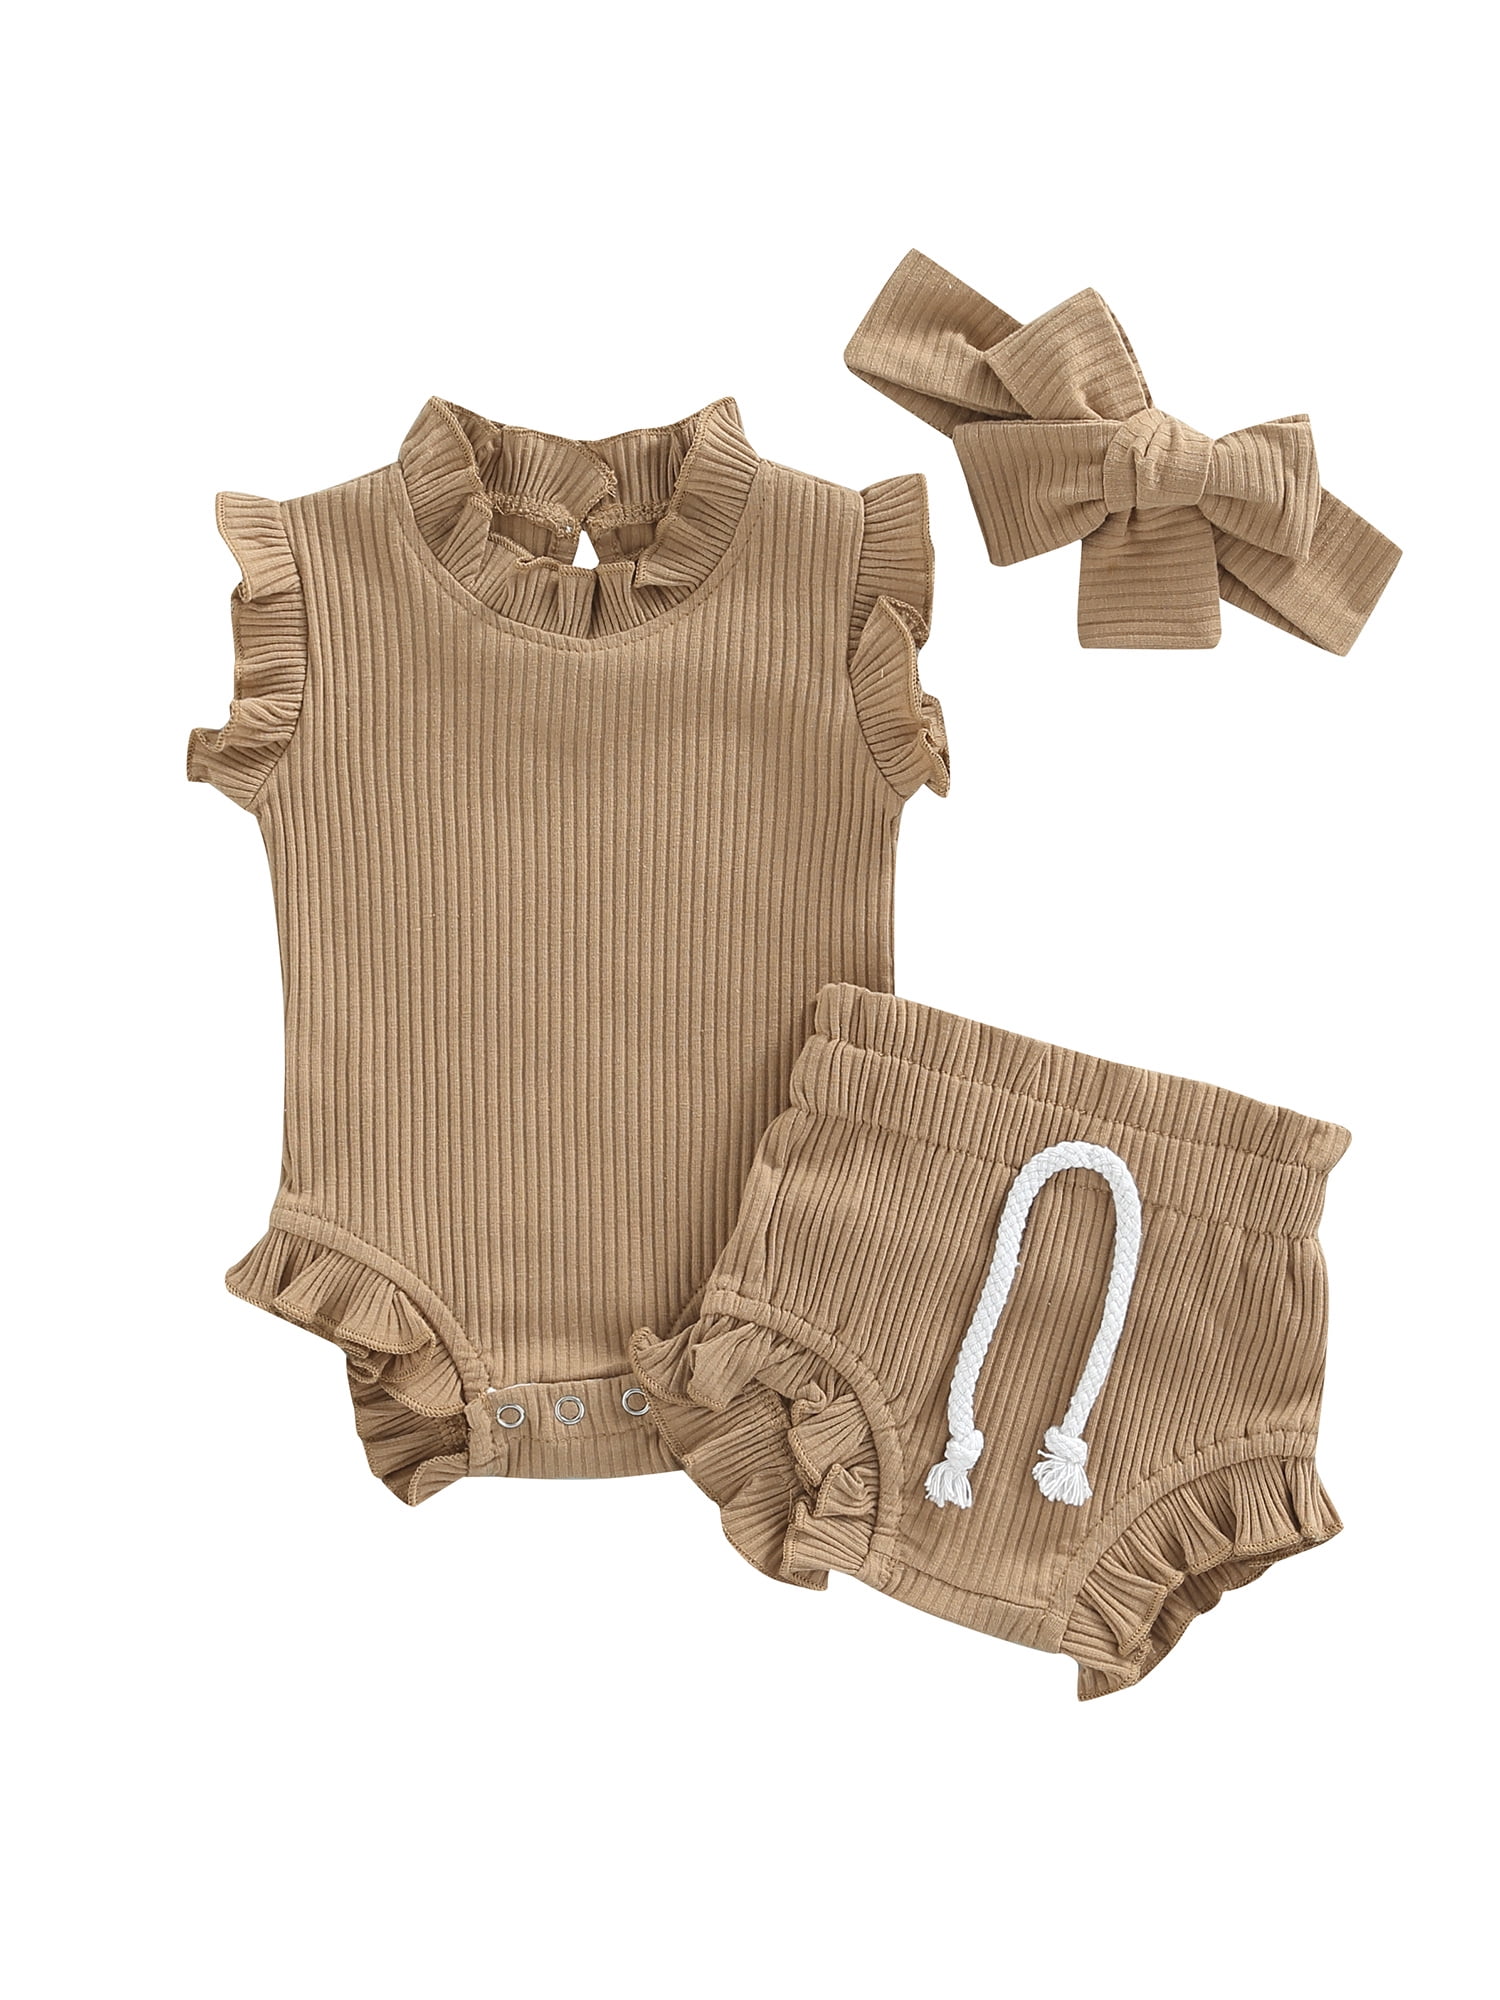 Newborn Infant Baby Girl Boy Outfit Solid Sleeveless Halter Romper Top and Shorts Bloomers Summer Clothes Set 